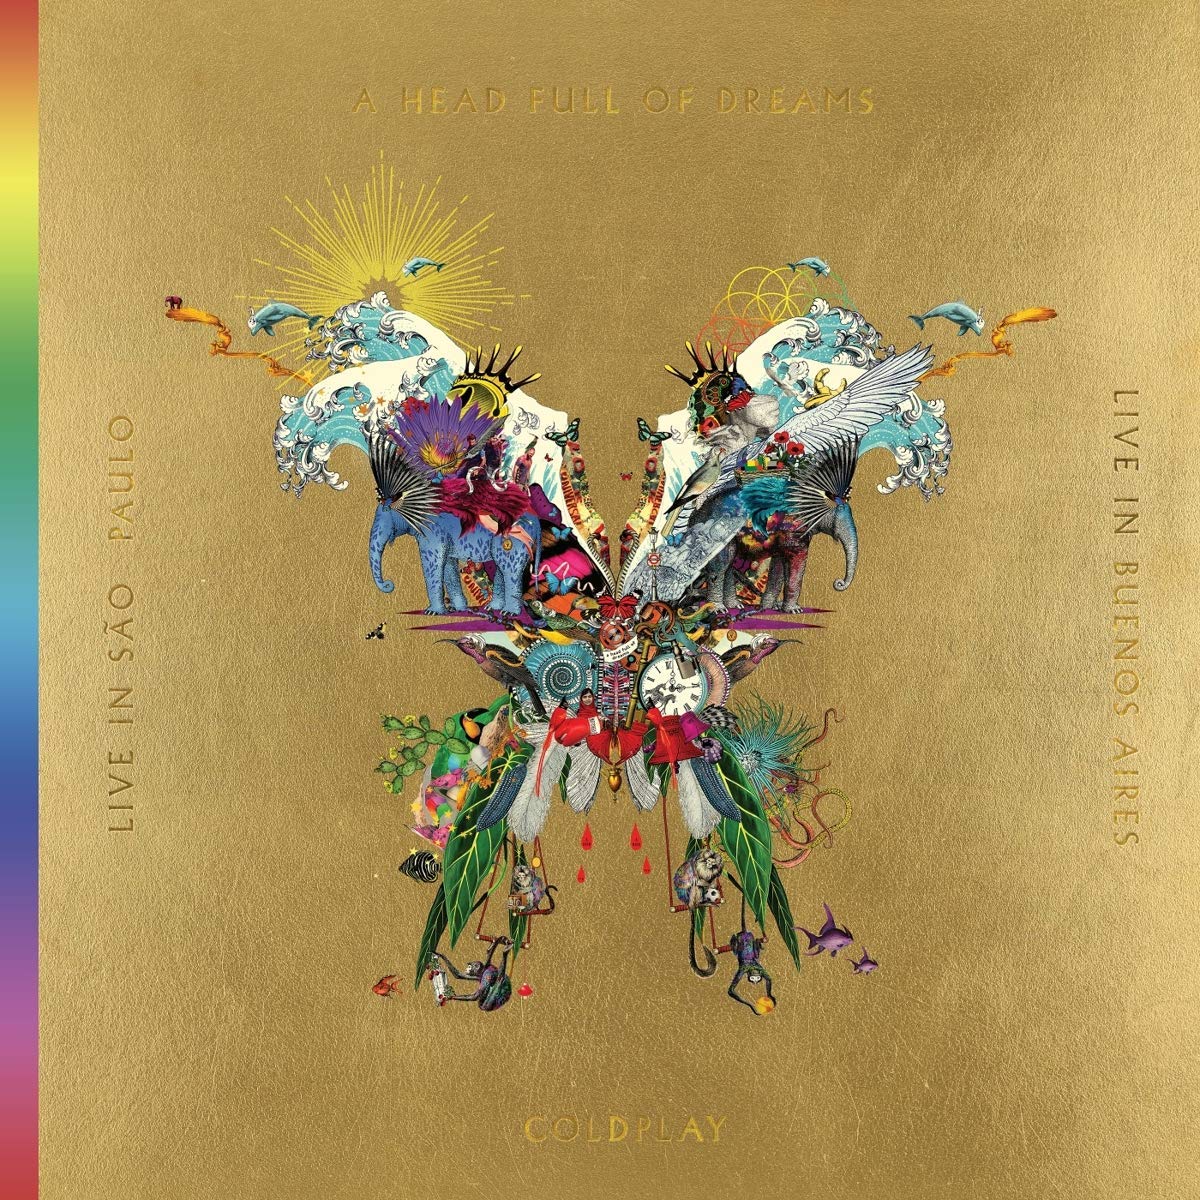 CD pas cher - Coldplay - Live in Buenos Aires / Live in Sao Paulo / A head full of dreams [2 CD + 2 DVD]